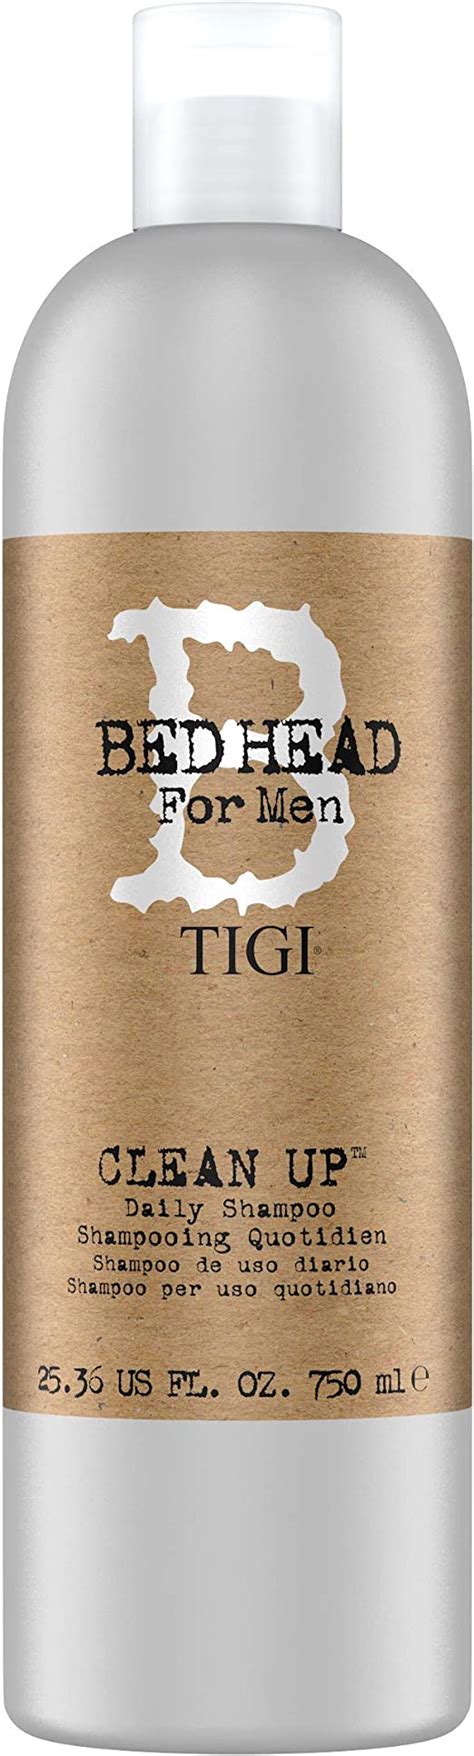 Bed Head B For Men Clean Up Daily Shampoo By Tigi For Men Oz